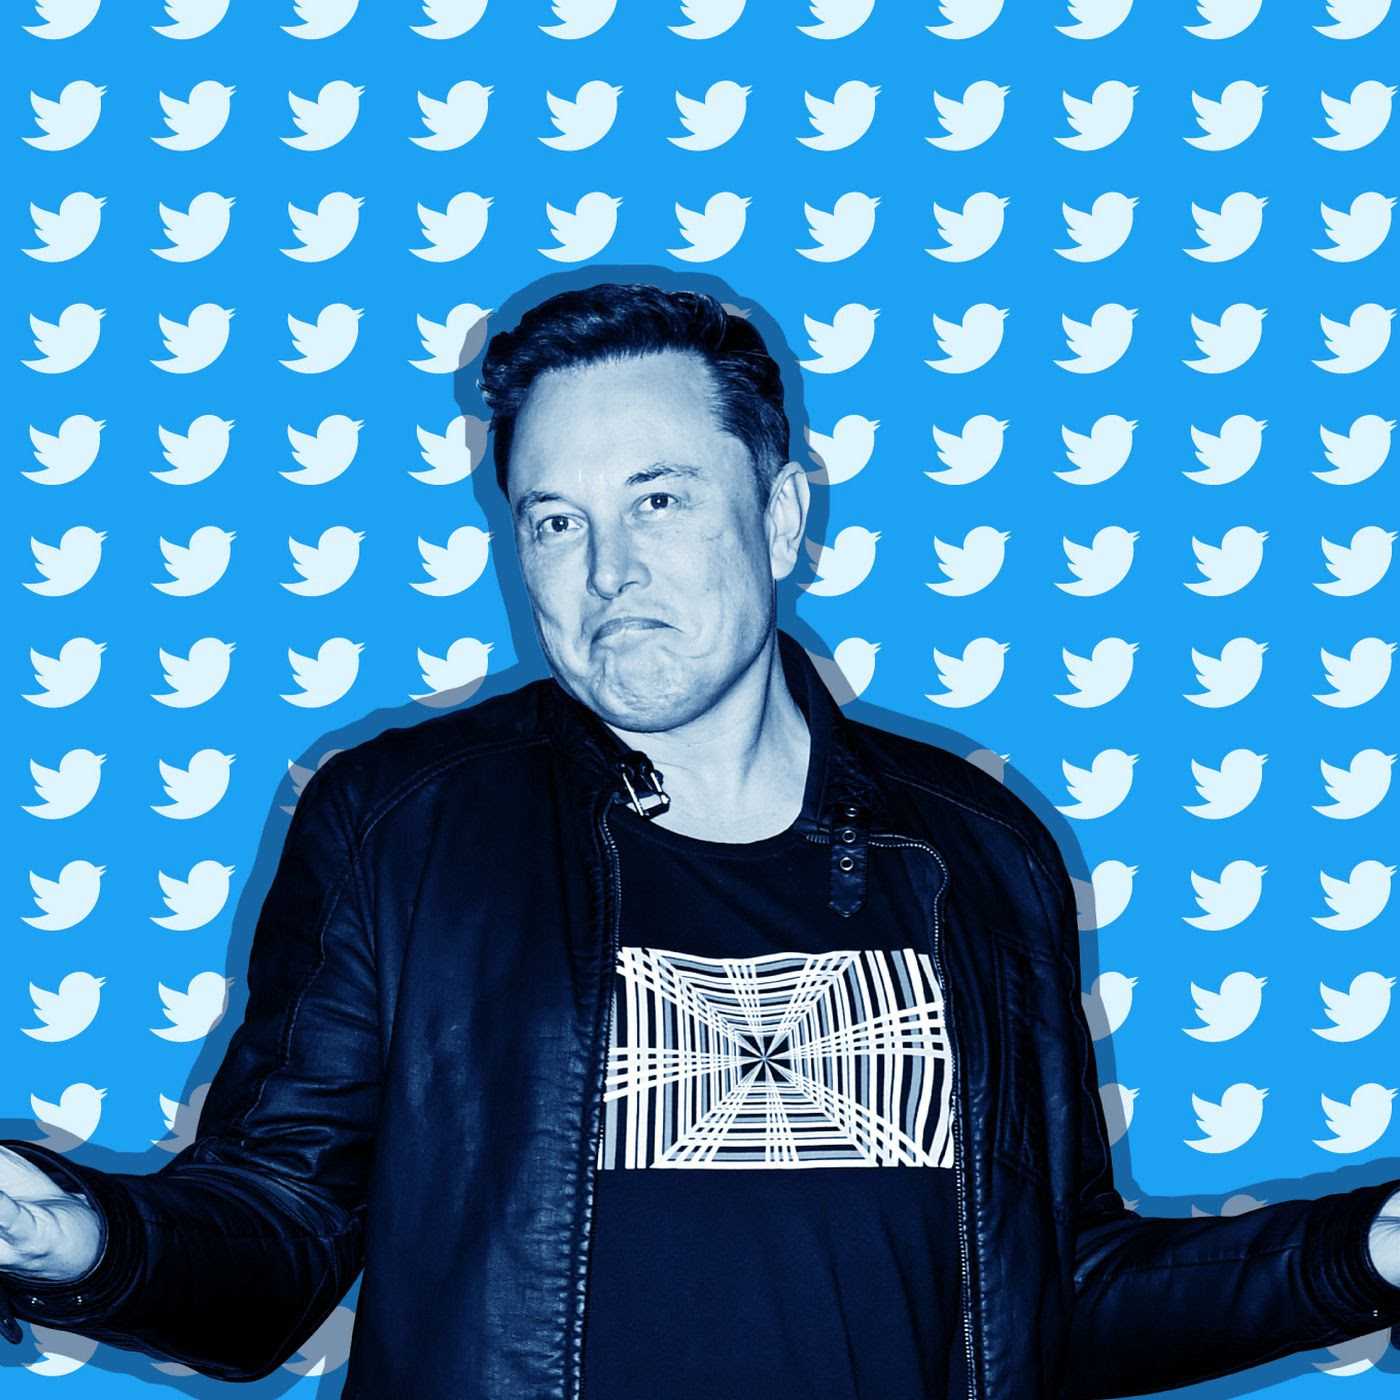 Elon Musk challenges Twitter CEO to a 'public debate' about bots